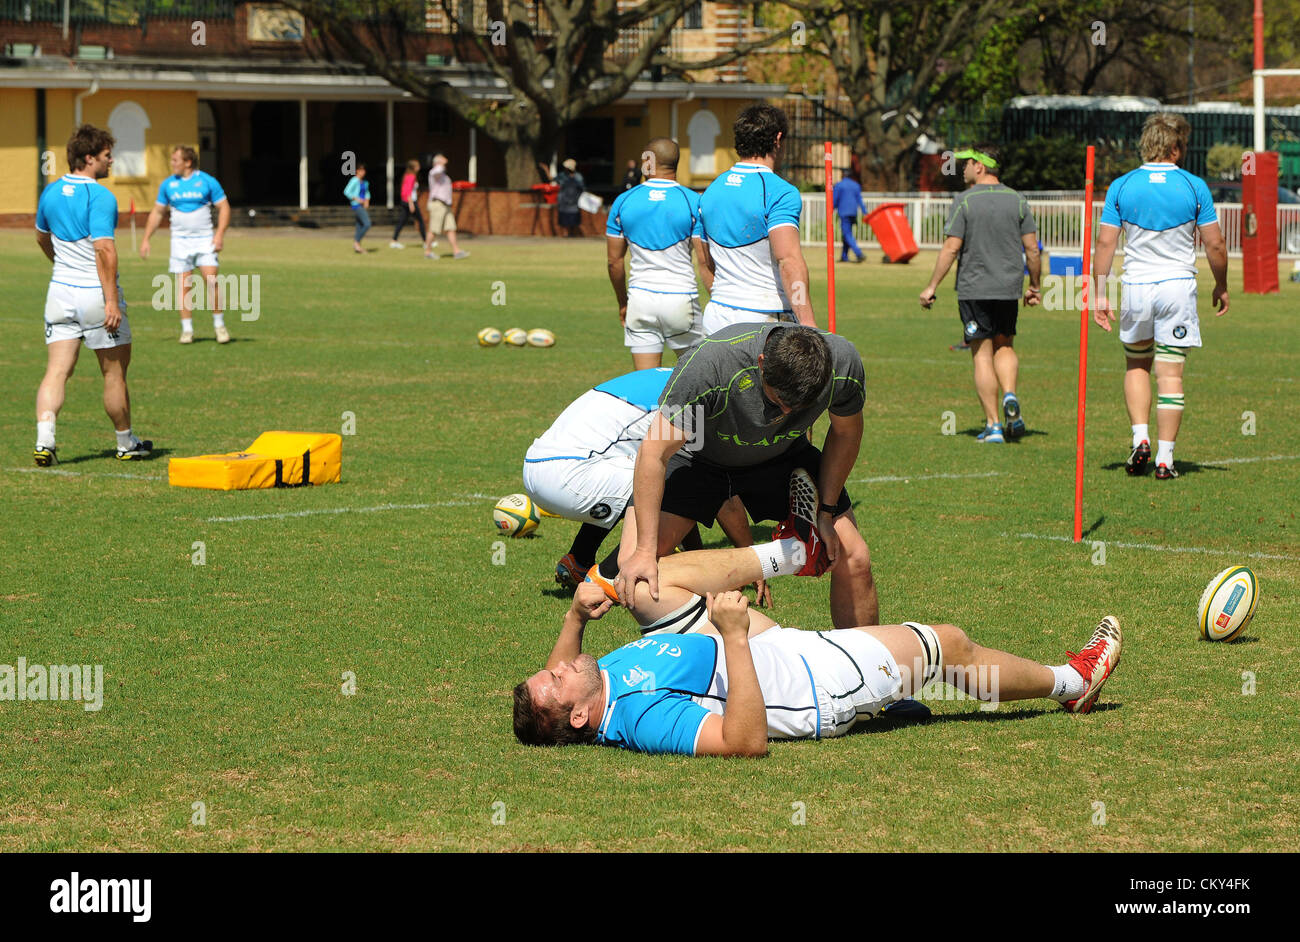 JOHANNESBURG, SOUTH AFRICA - SEPTEMBER 01, Flip van der Merwe getting stretched during the South African national rugby team field session and media conference at KES on September 01, 2012 in Johannesburg, South Africa Photo by Duif du Toit / Gallo Images Stock Photo